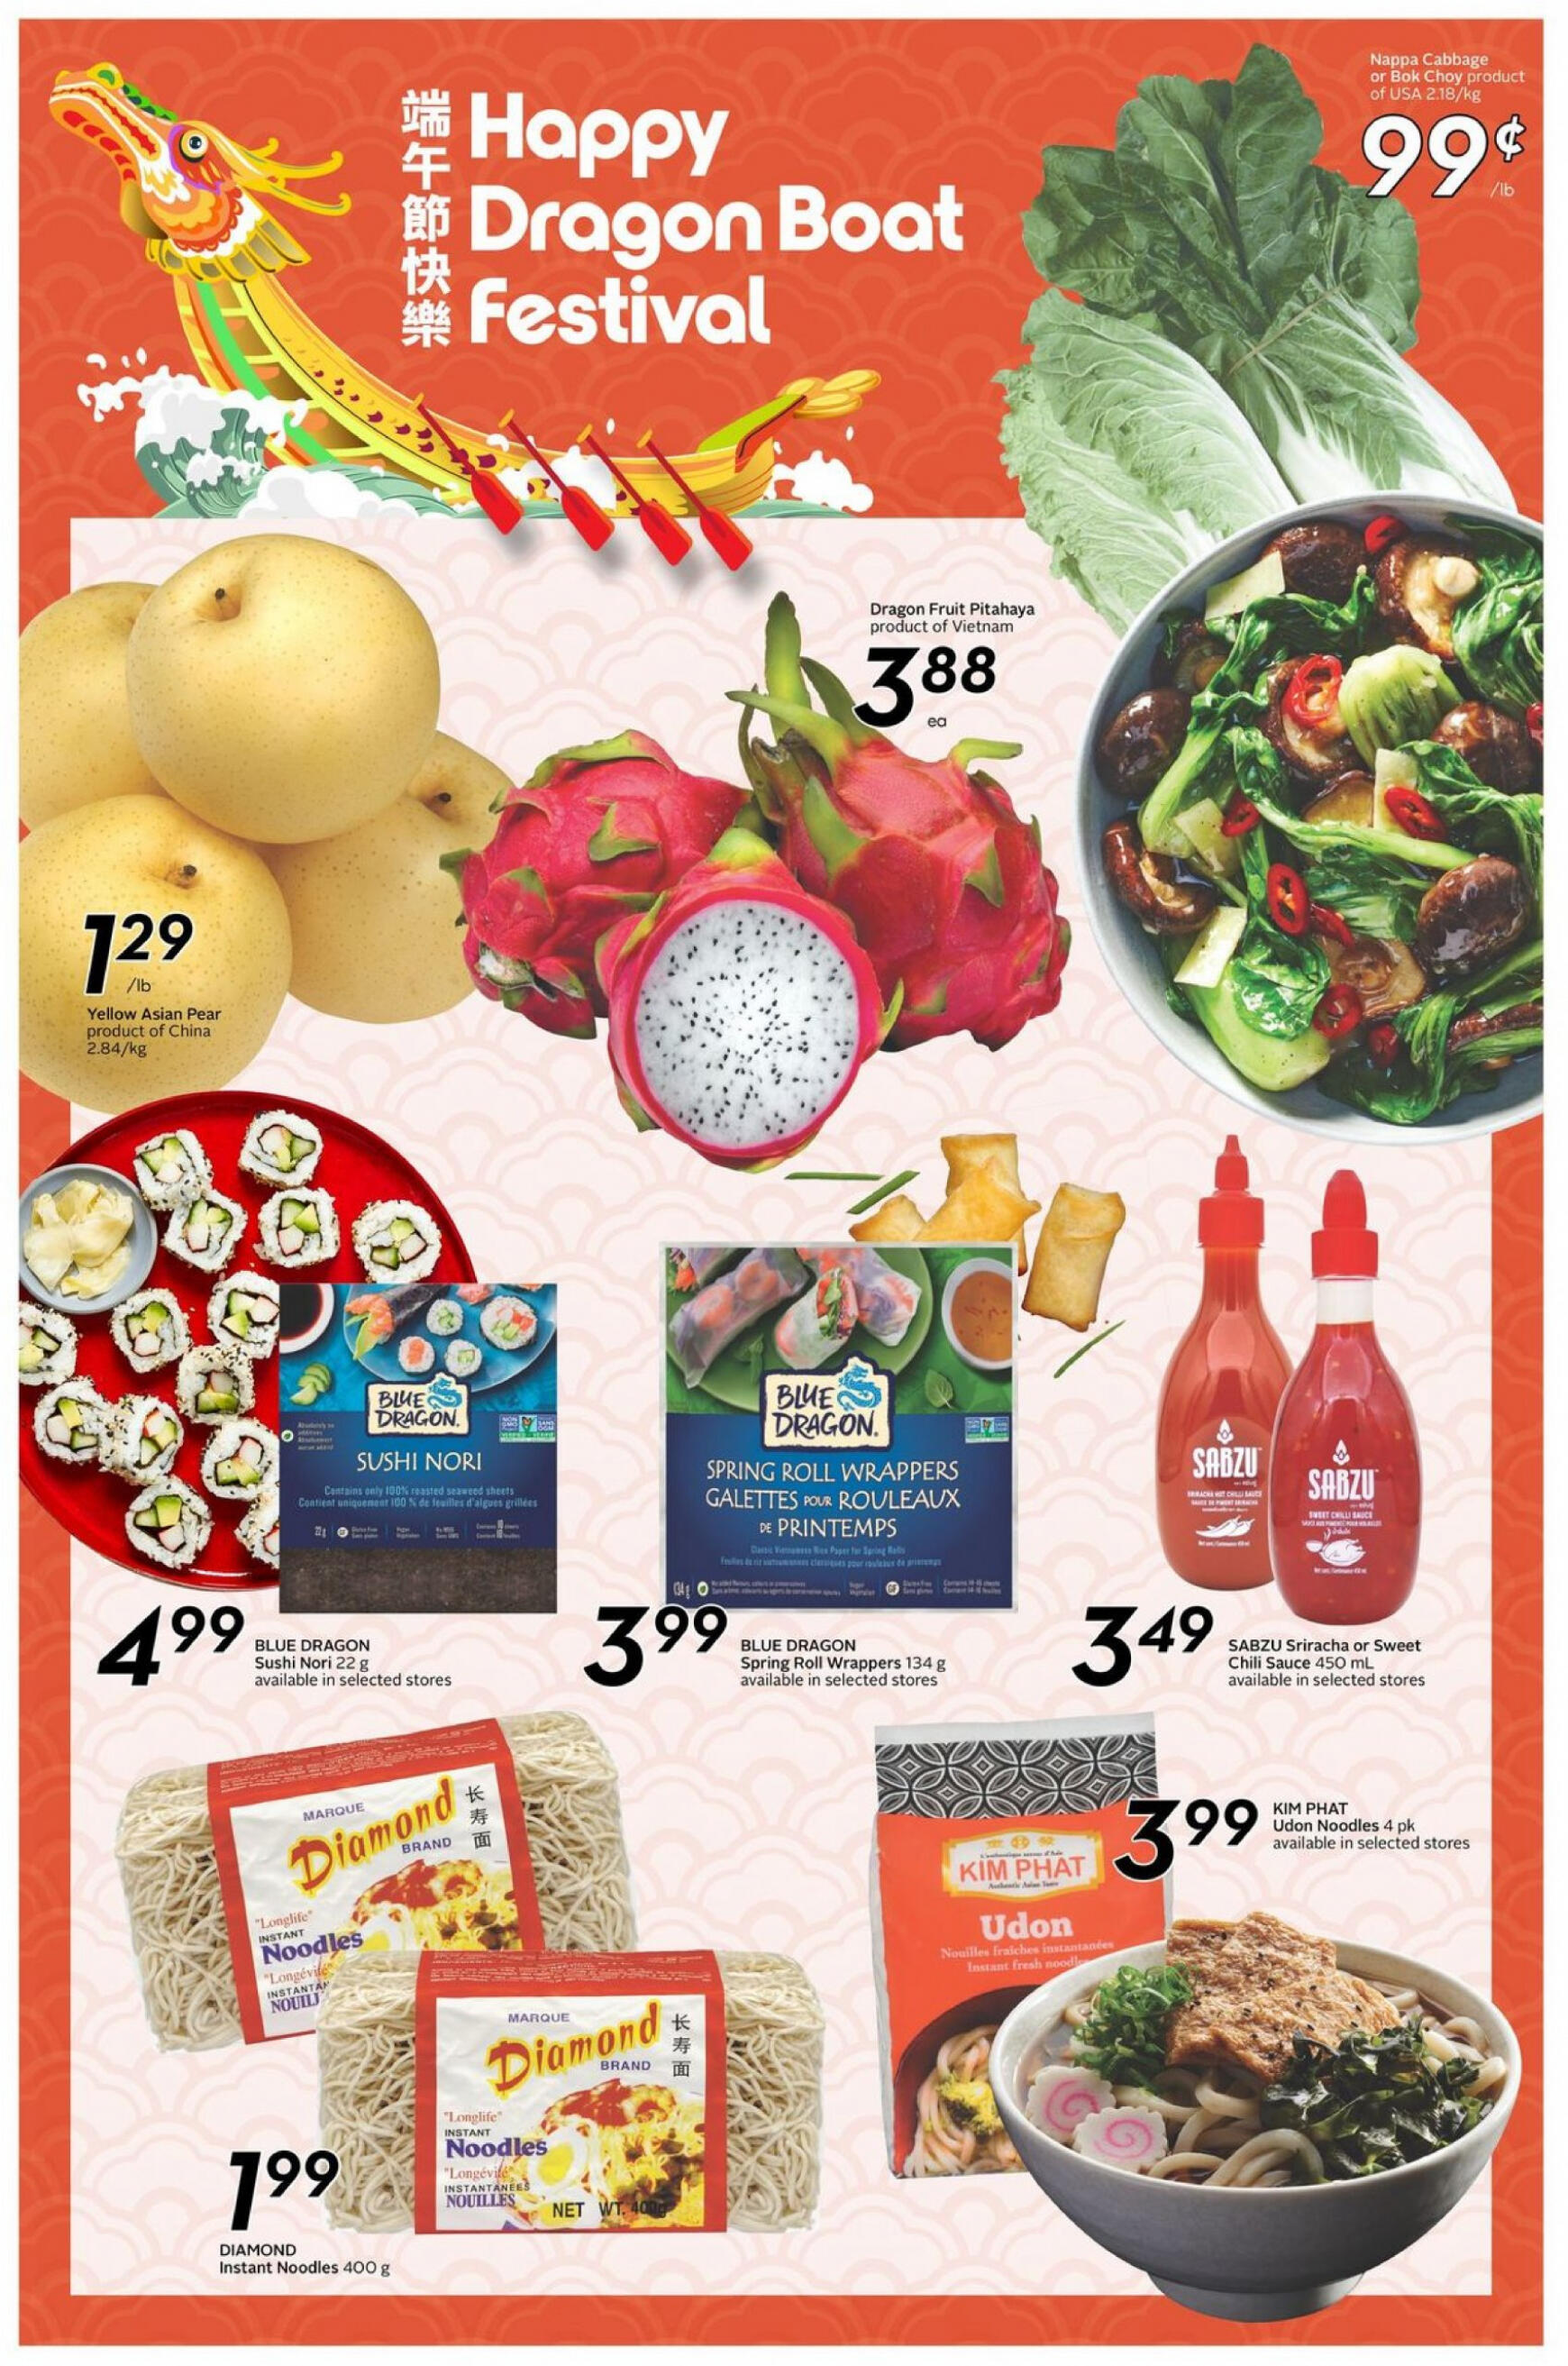 sobeys - Sobeys - Weekly Flyer - Ontario flyer current 09.05. - 15.05. - page: 12